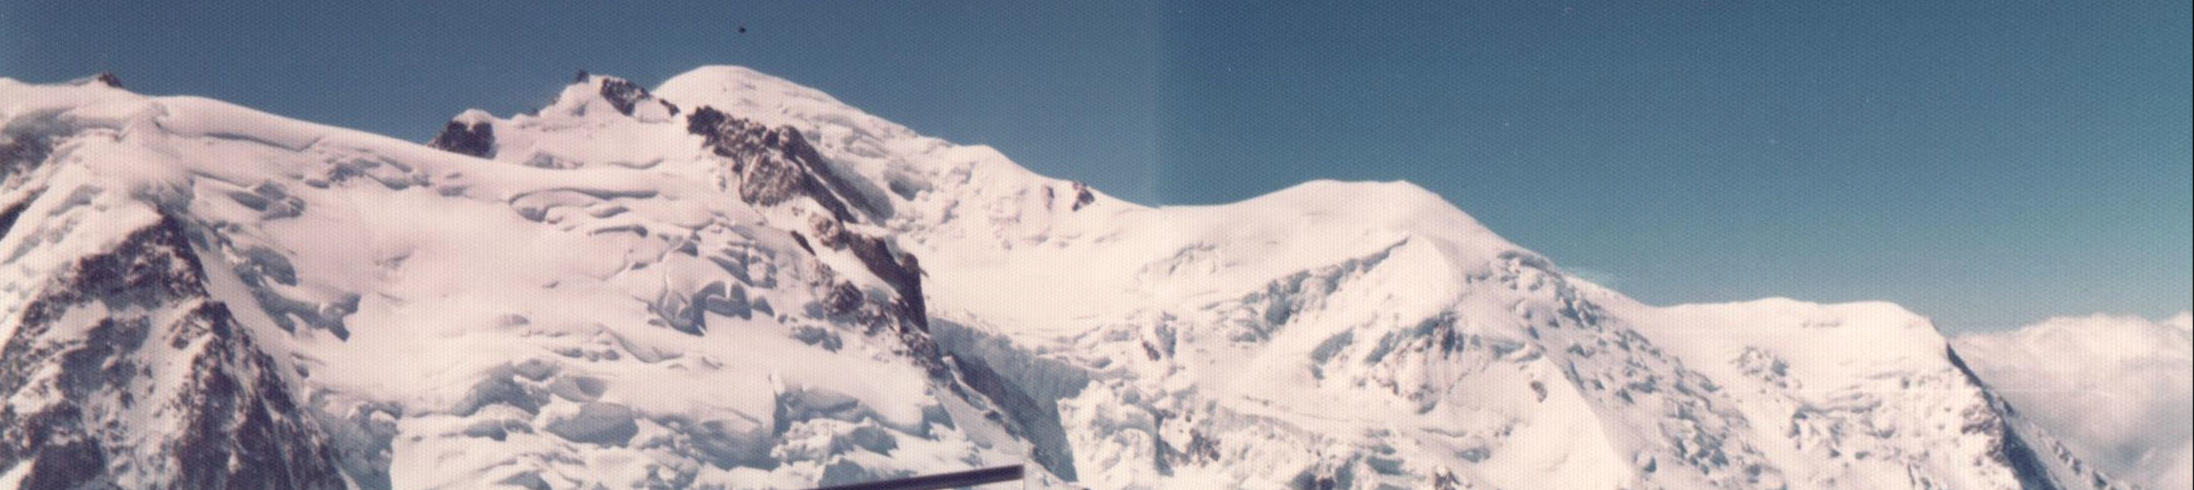 Mont Blanc from the Aiguille du Midi